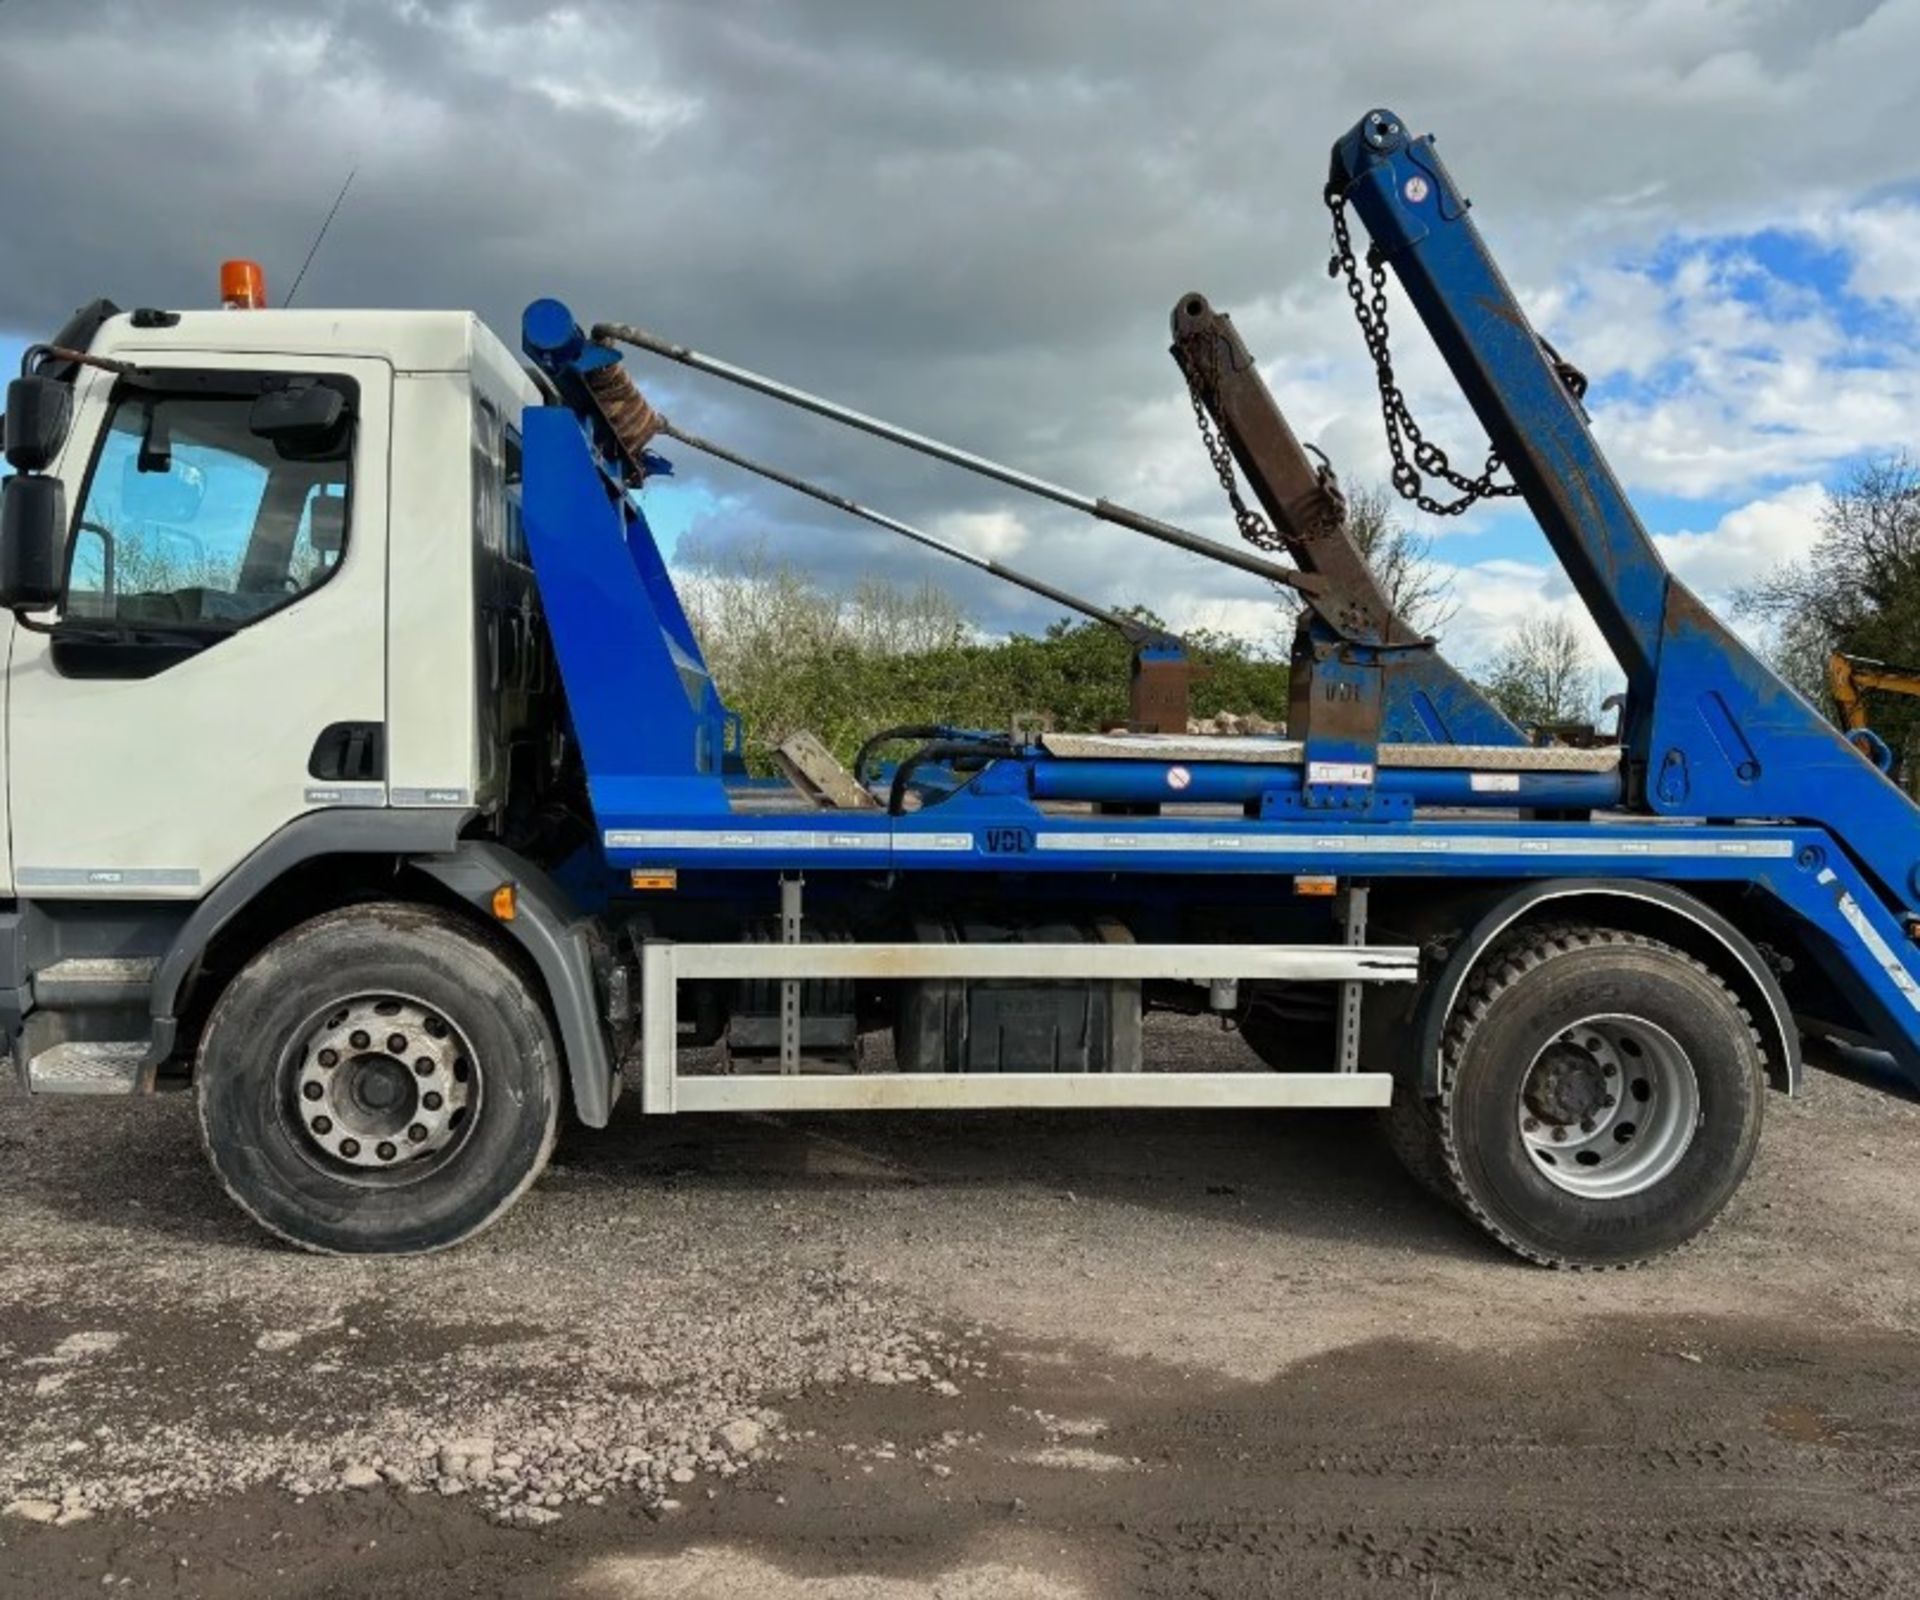 2016 DAF LF220 SKIPWAGON - RELIABLE, TESTED, AND READY FOR YOUR BUSINESS NEEDS - Image 11 of 18